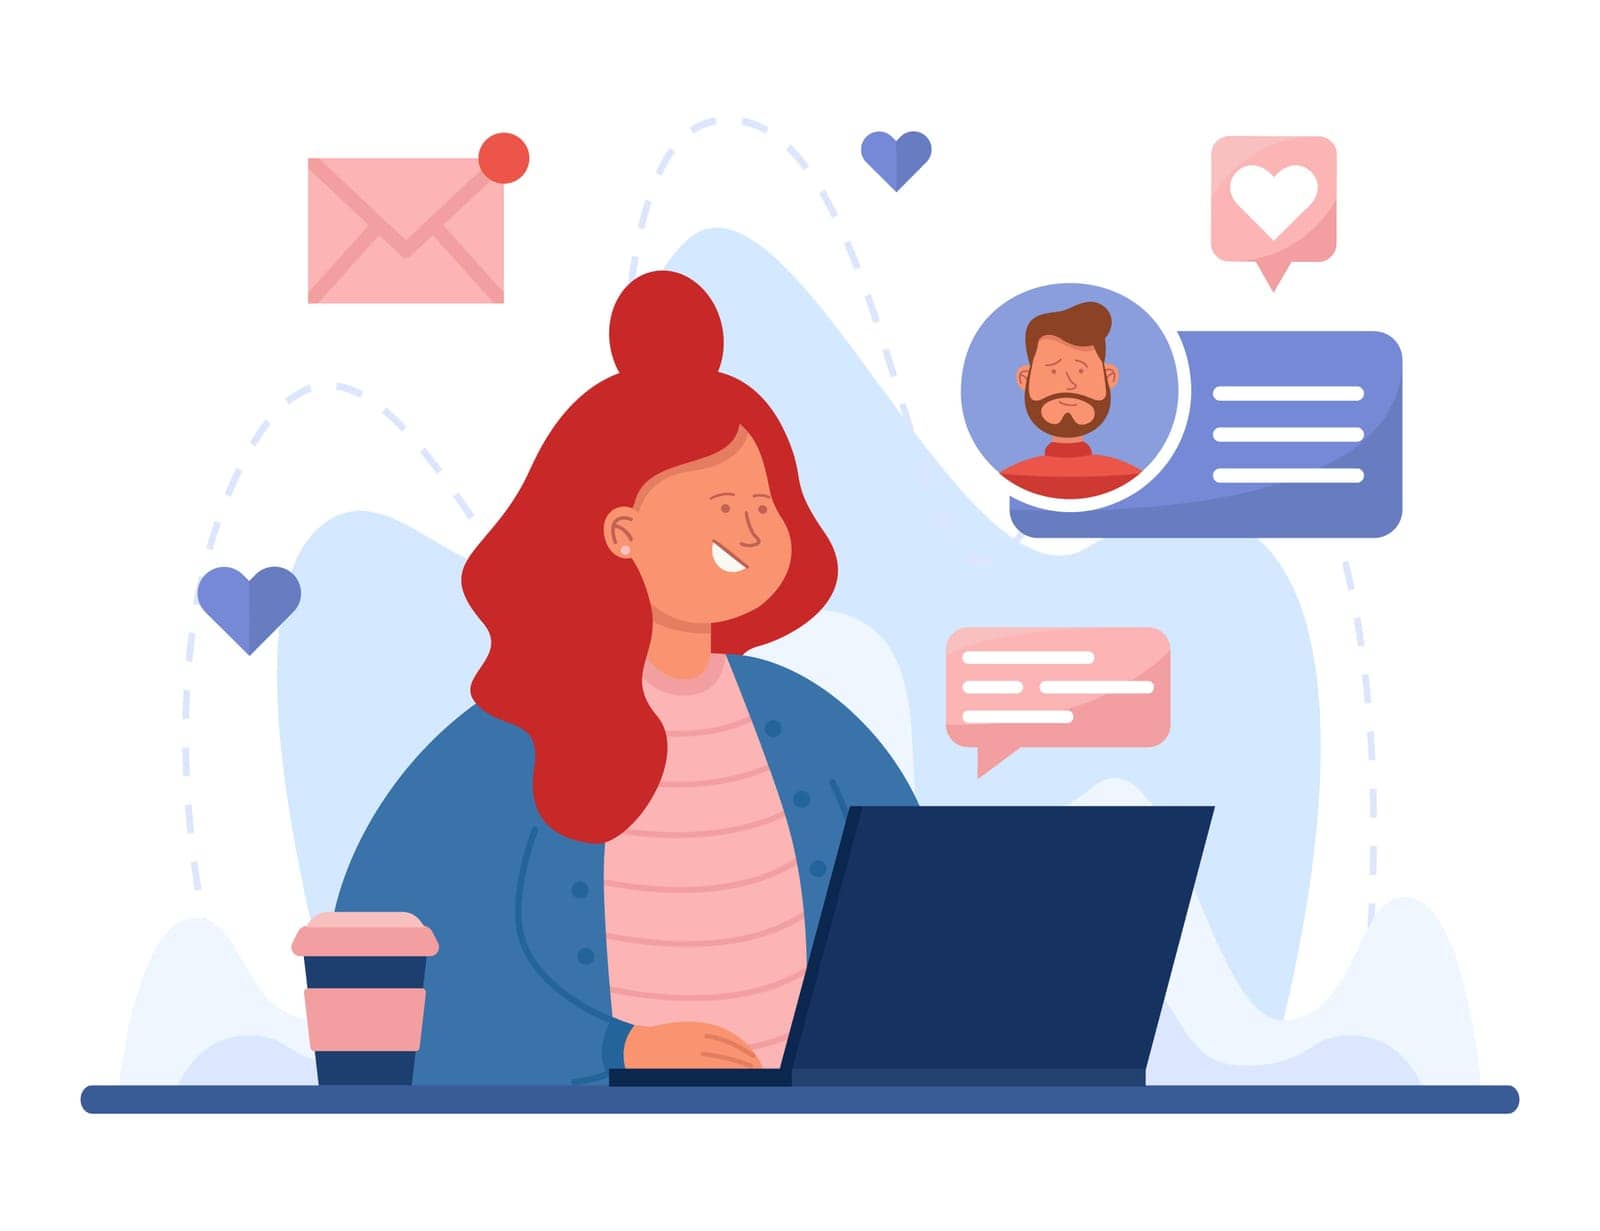 Cartoon girl searching for romantic partner using laptop. Woman sitting at computer and trying to find boyfriend online. Flat vector illustration. Social network, love, relationship, service concept